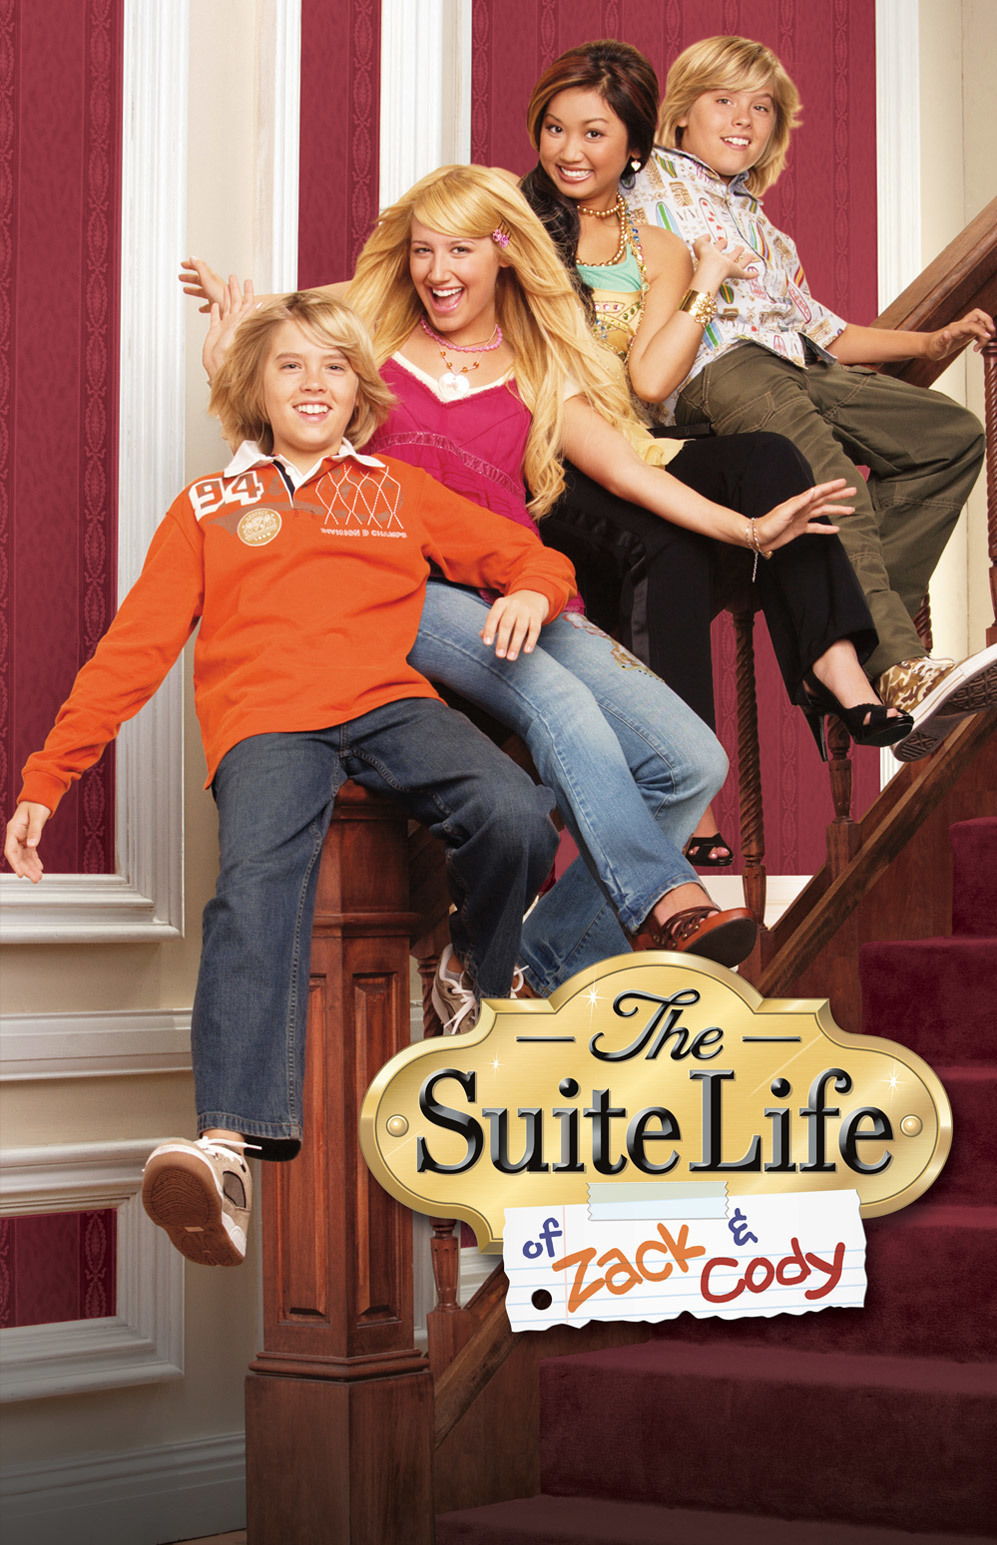 The Suite Life of Zack and Cody Disney Channel